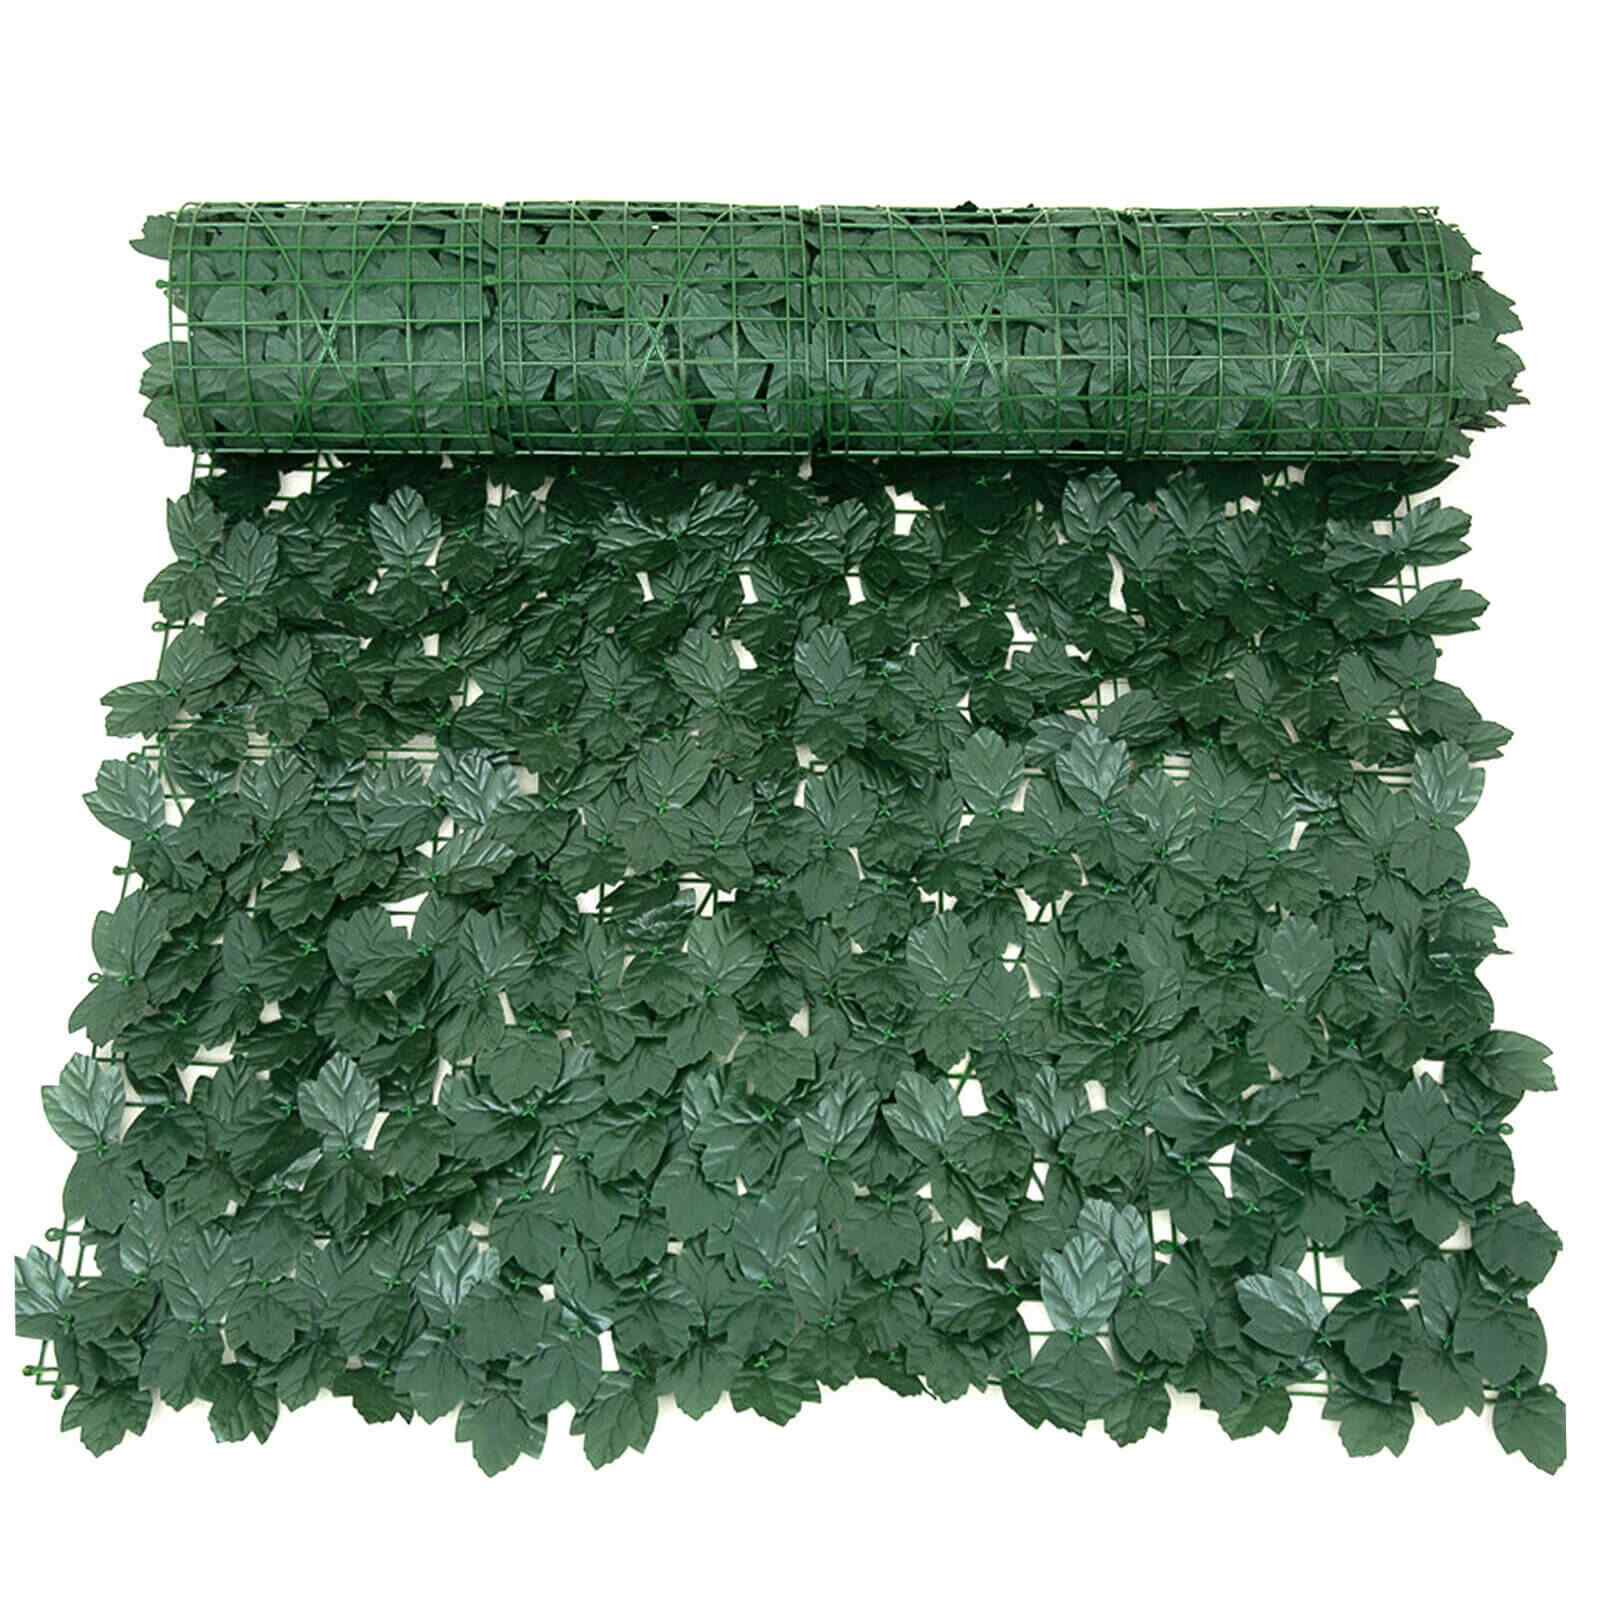 Display of Durable Privacy Artificial Fence Screen Faux Ivy Leaf